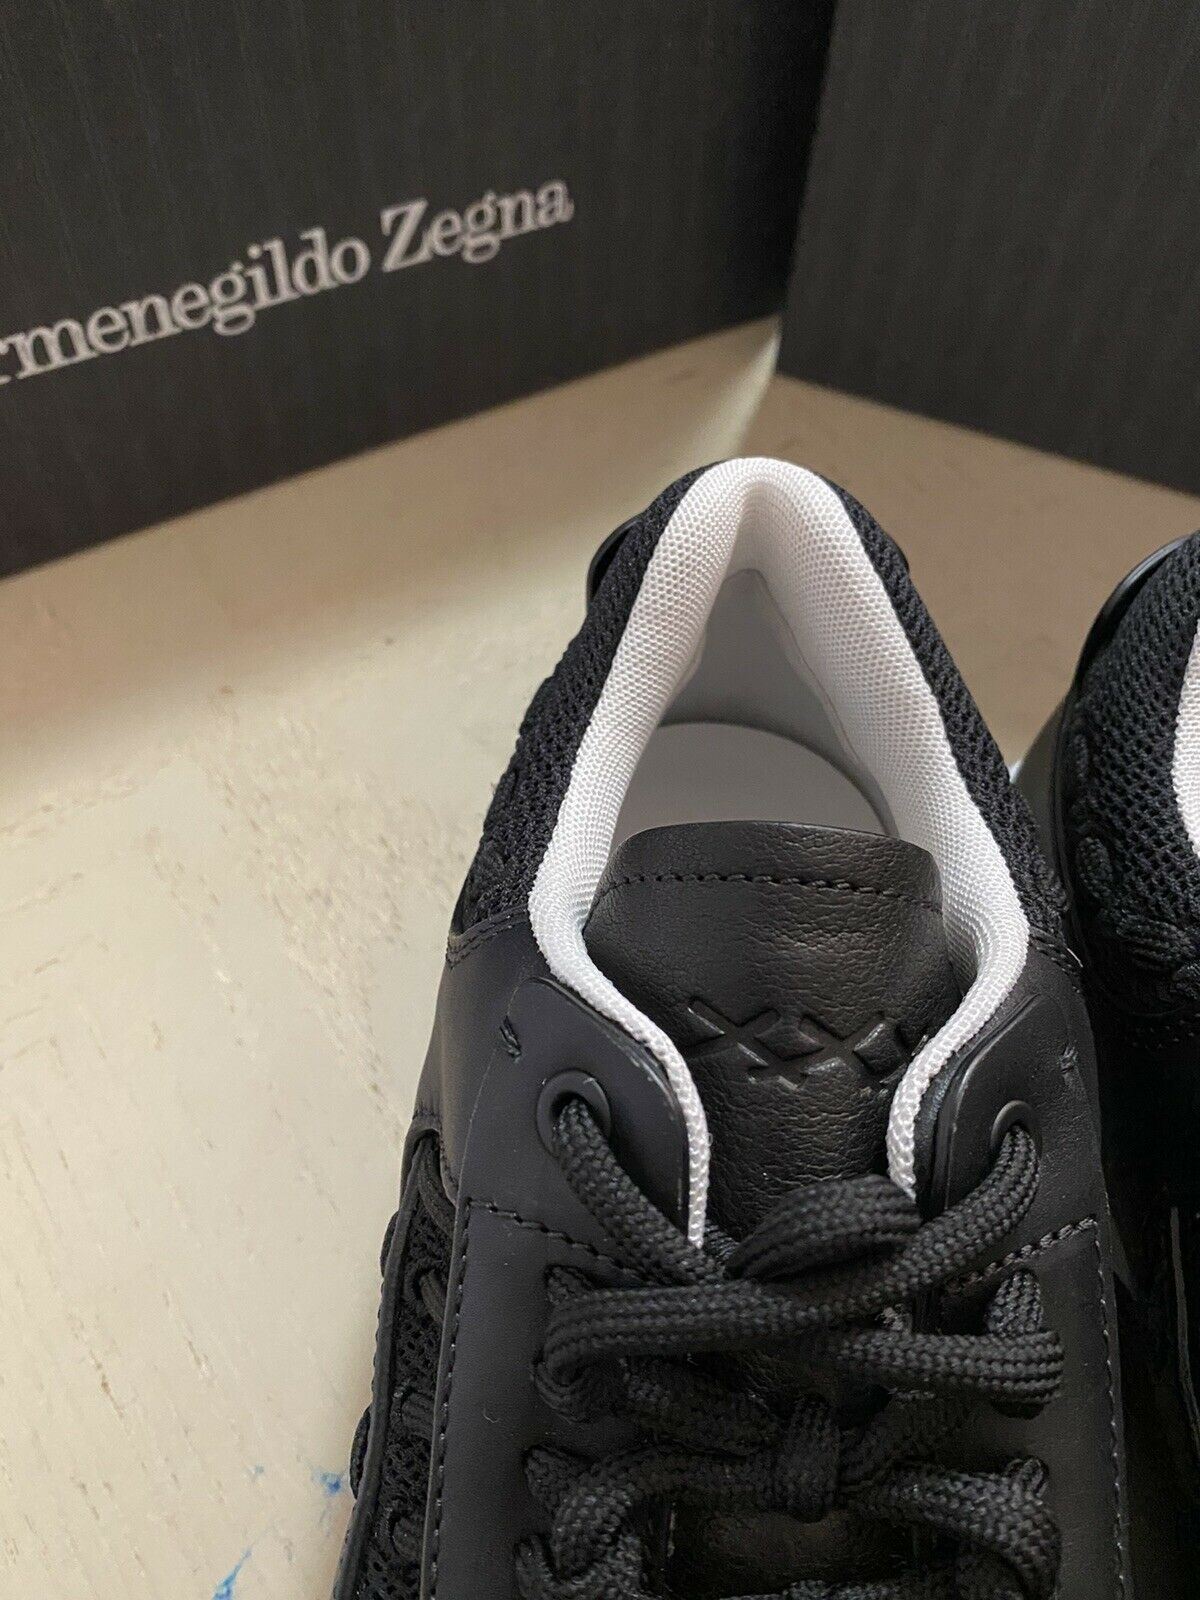 New $795 Ermenegildo Zegna Couture Leather Sneakers Shoes Black 11 US Italy